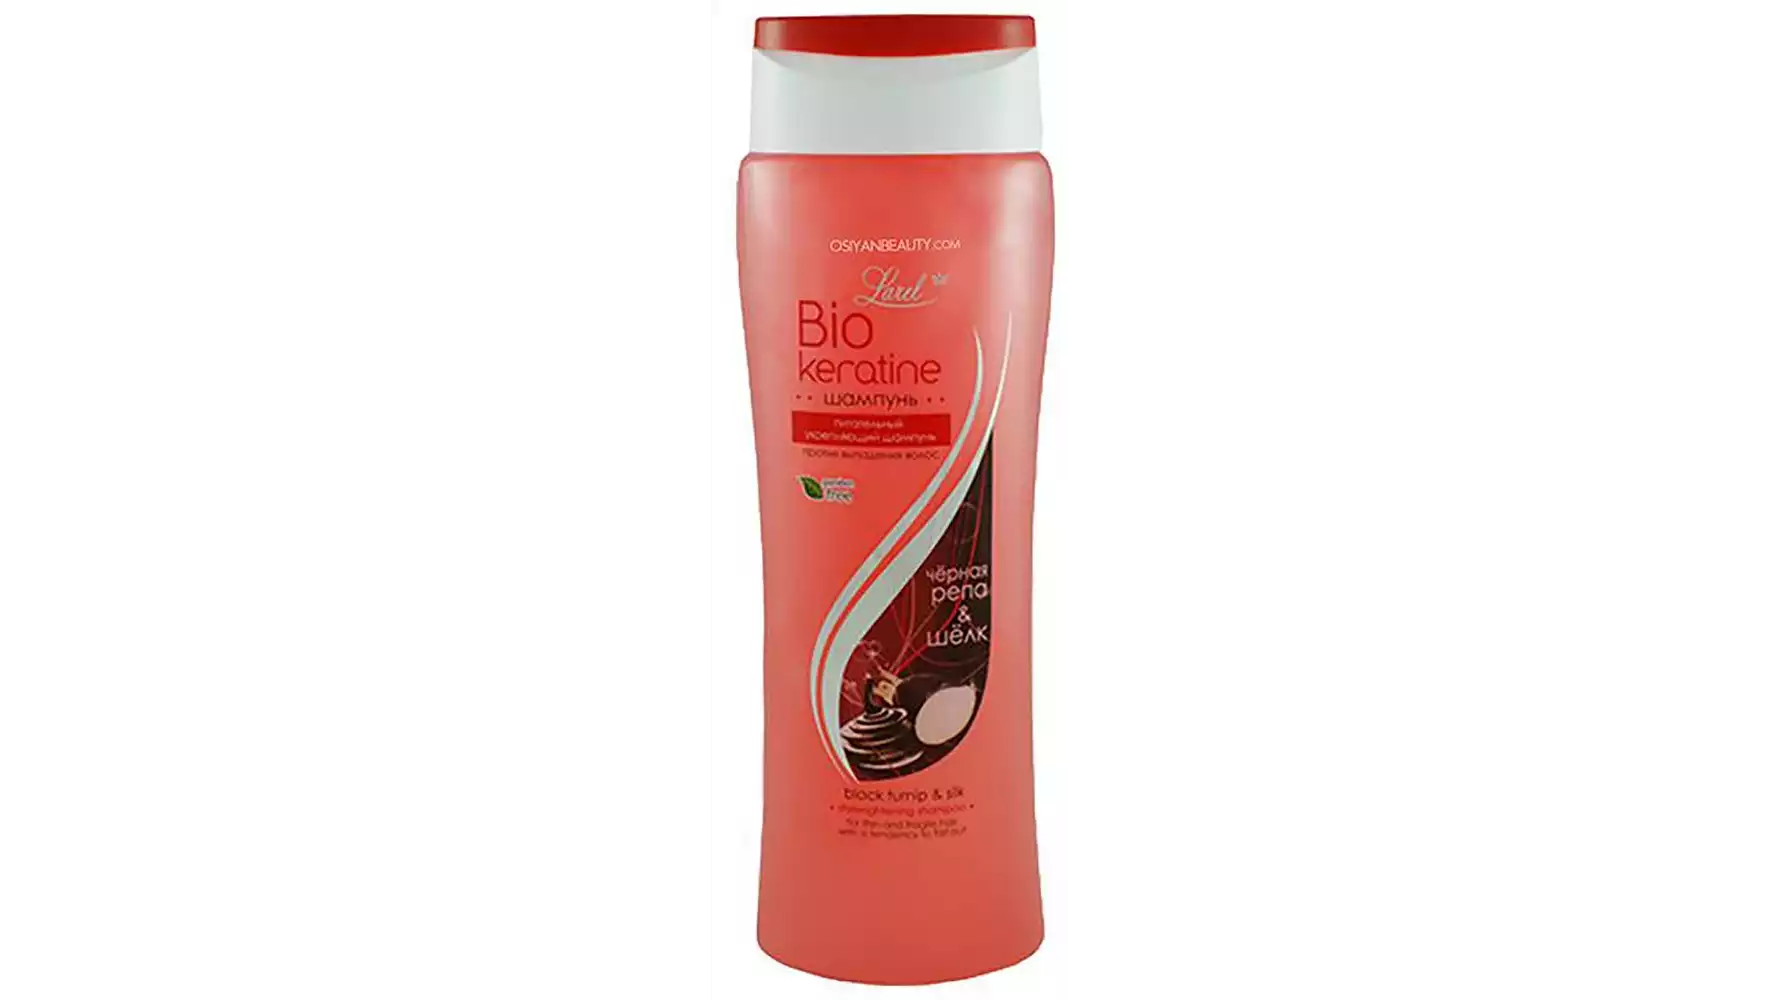 Larel Bio Keratine Shampoo With Black Turnip Extract And Silk Strengthening For Thin And Fragile Hair With A Tendency To Fall Out (Made In Europe) (400ml)